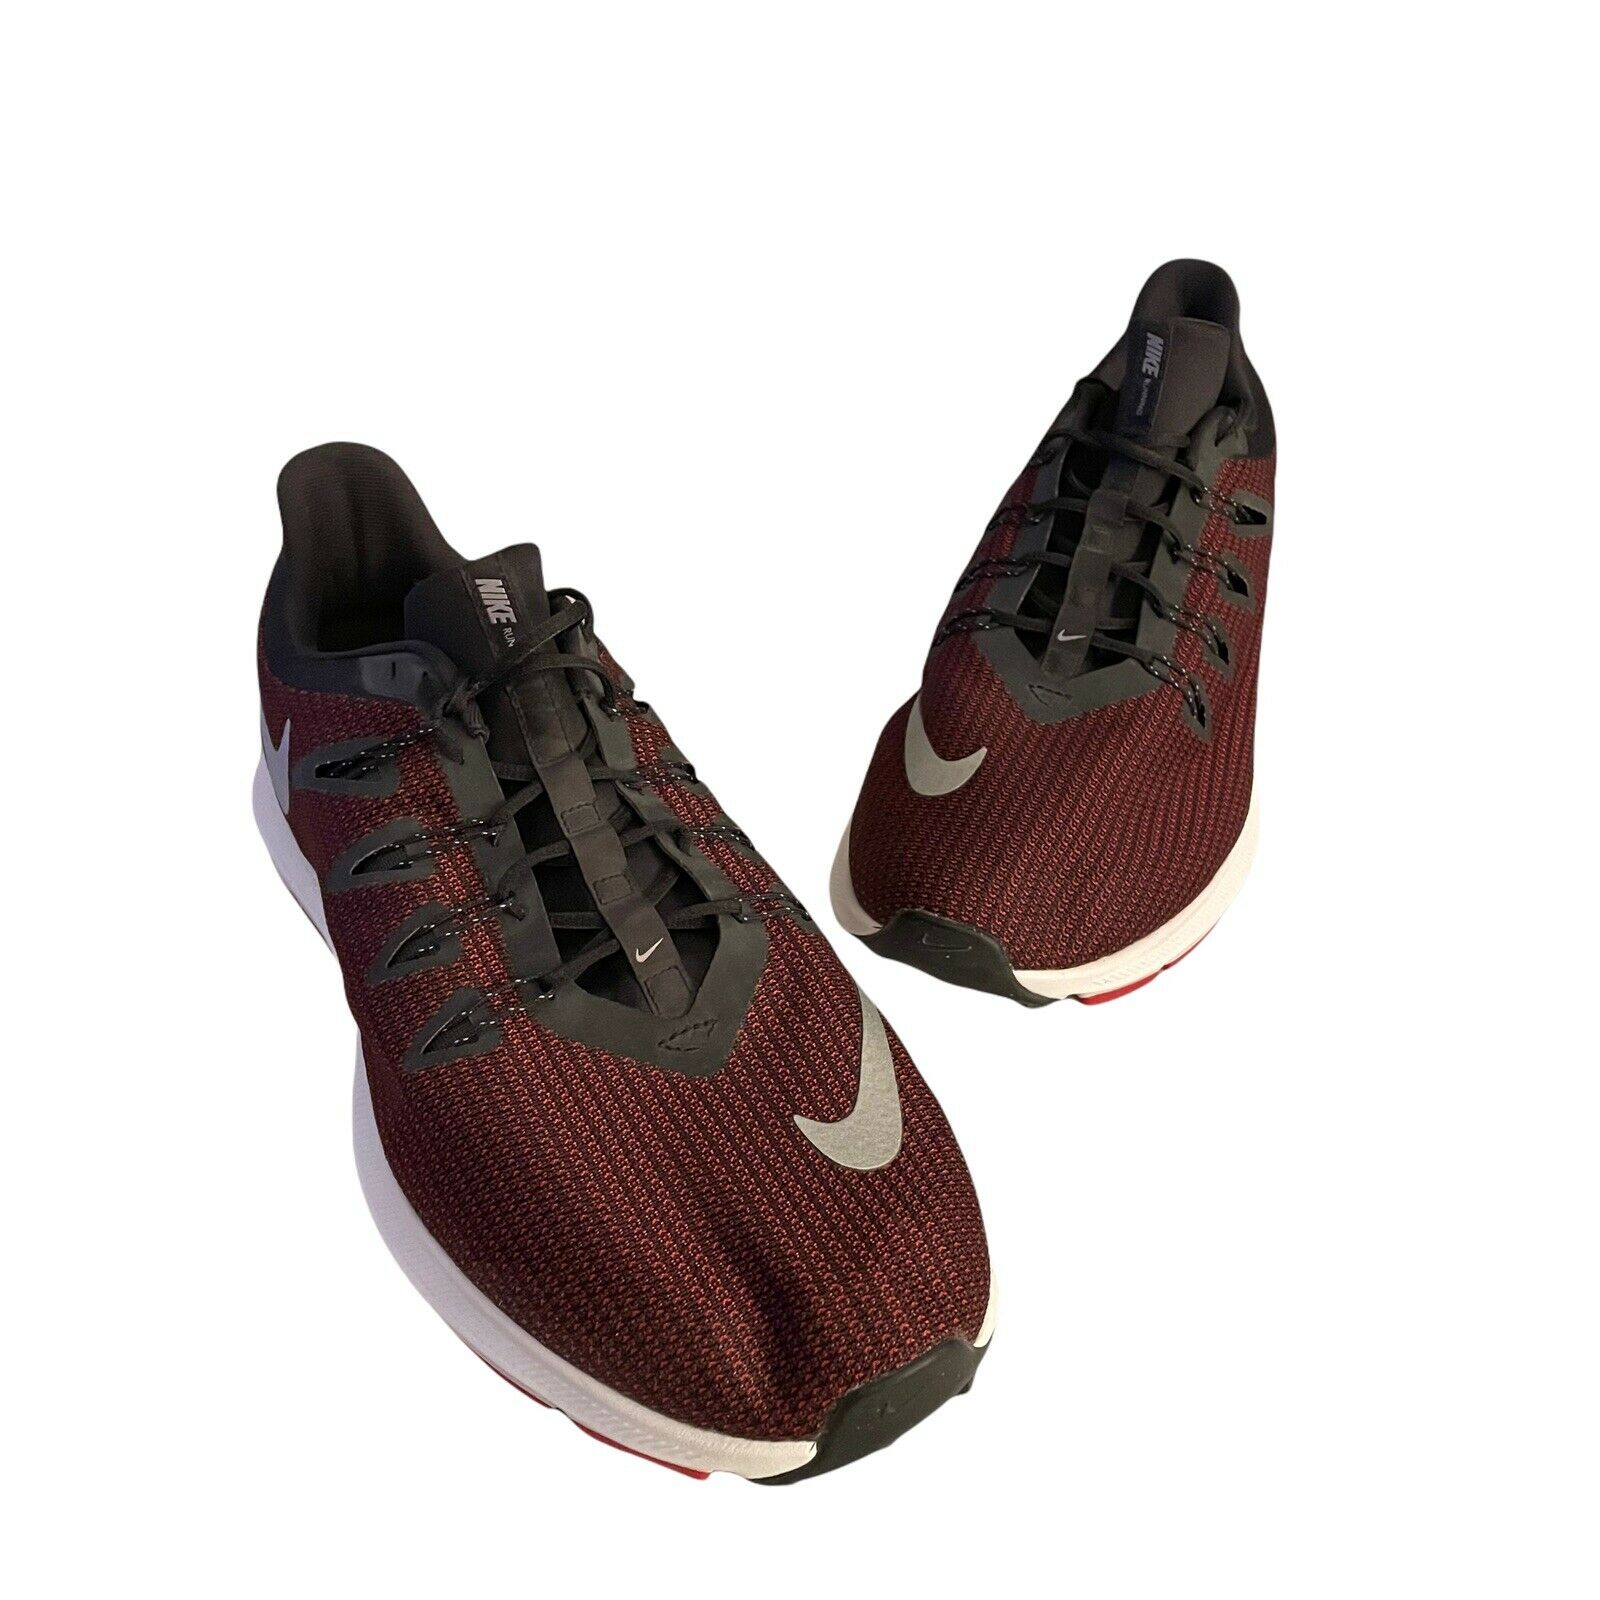 Nike Quest Running Shoes Red Silver Men’s Size 13 4E AV8013-004 New W/O Box